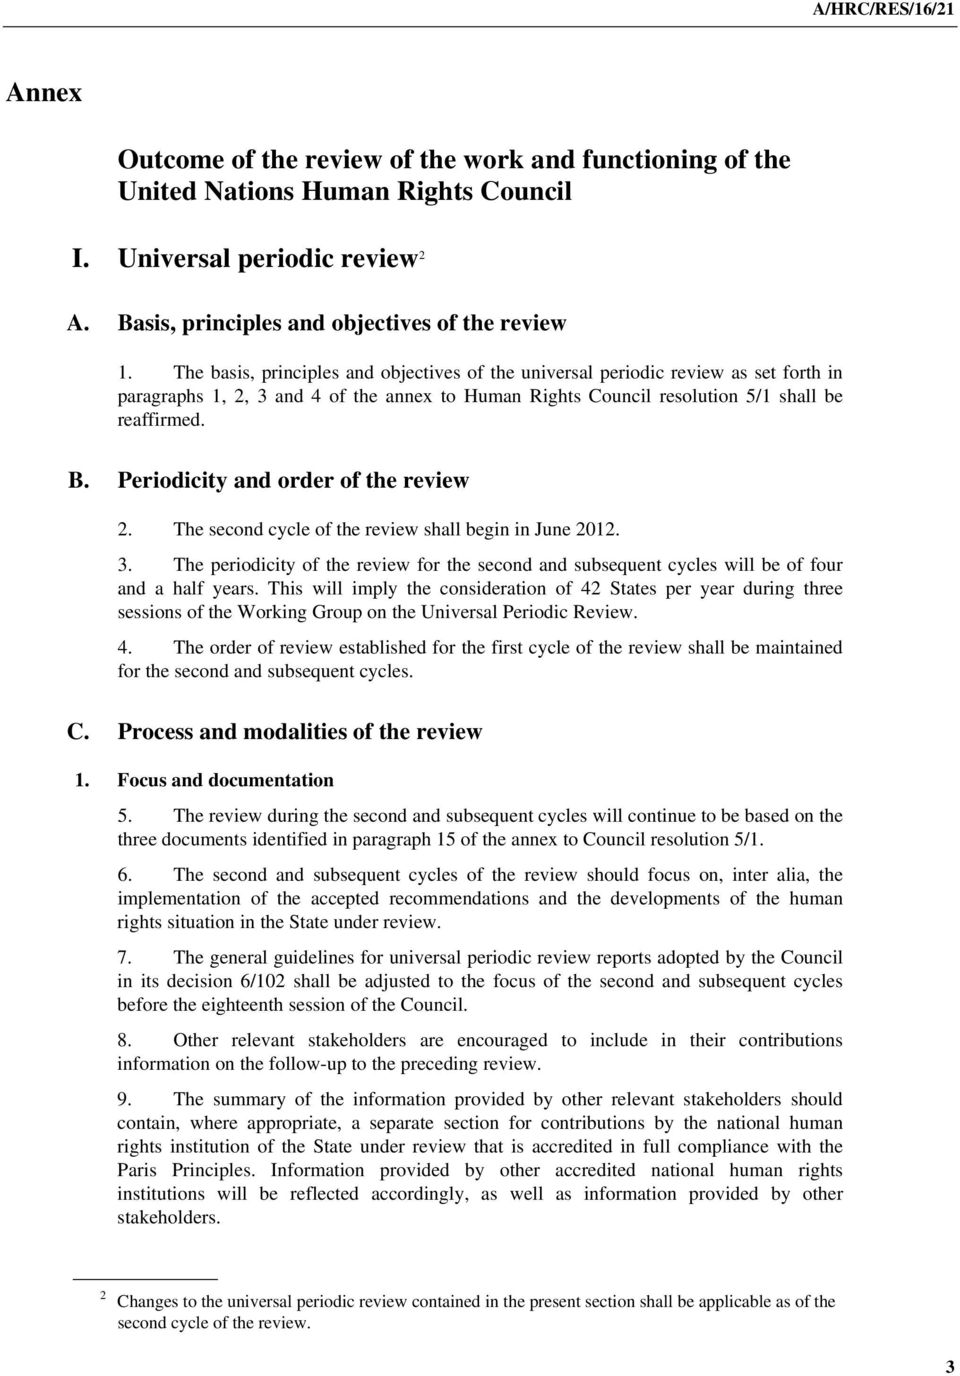 Periodicity and order of the review 2. The second cycle of the review shall begin in June 2012. 3. The periodicity of the review for the second and subsequent cycles will be of four and a half years.